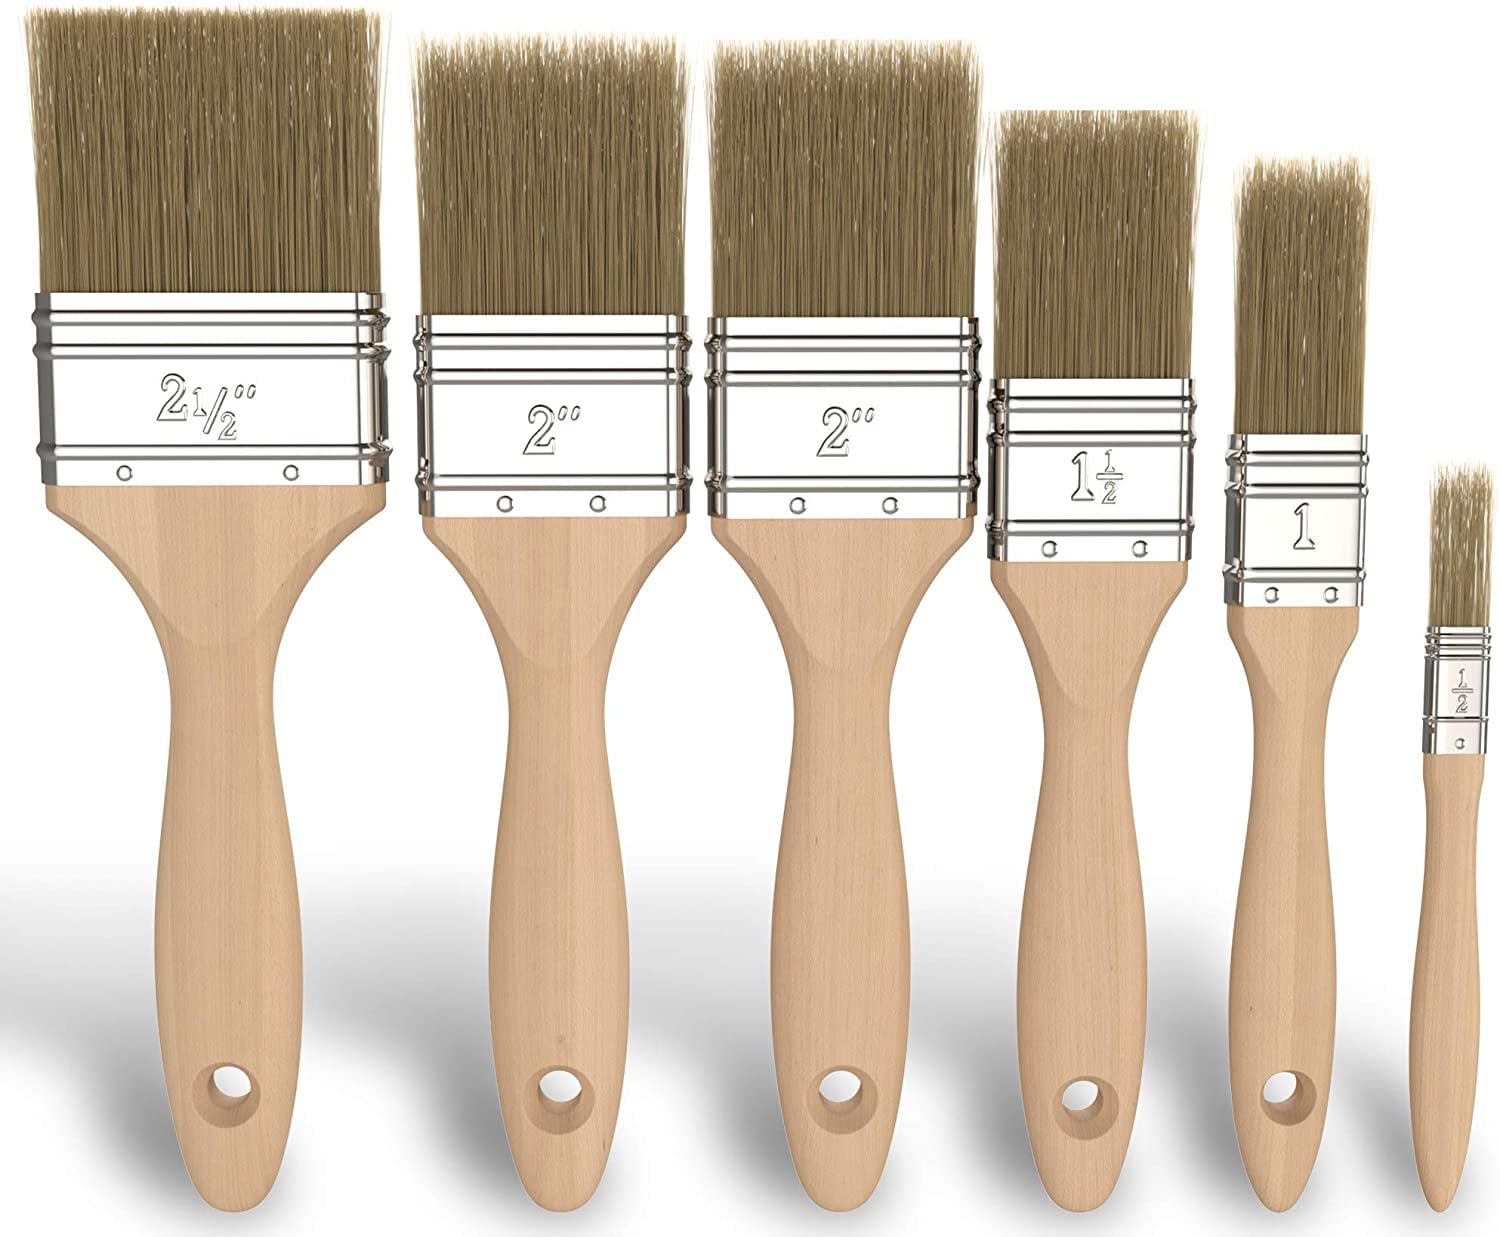 4. The Best Nail Art Brushes for Every Type of Design - wide 2